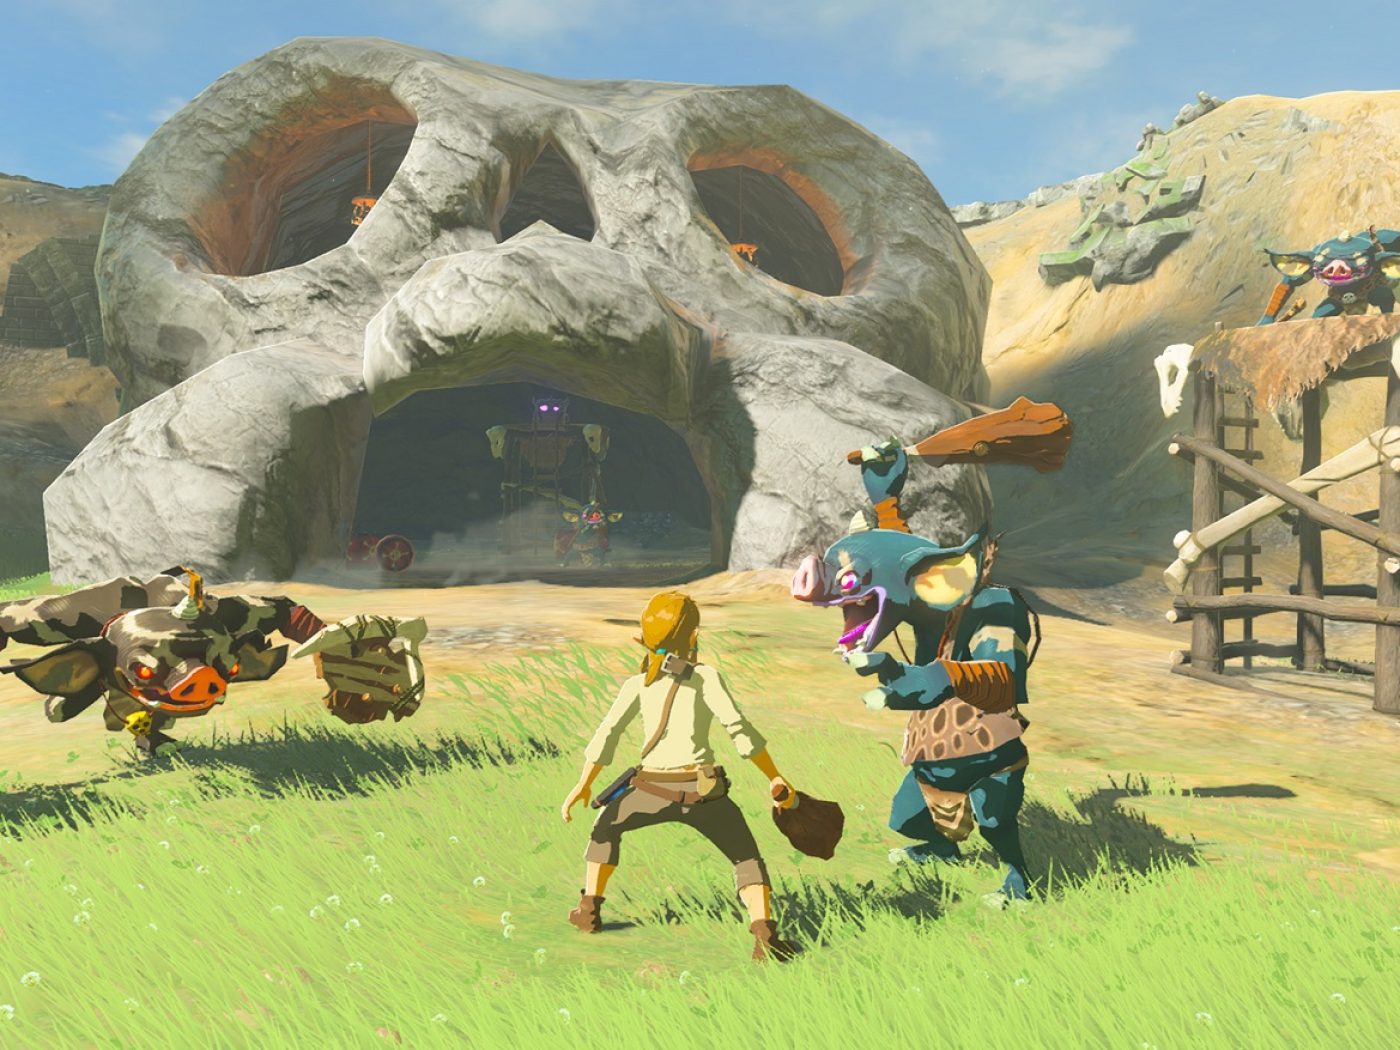 Nintendo's 2nd Breath of the Wild DLC Pack Will Launch in 2017